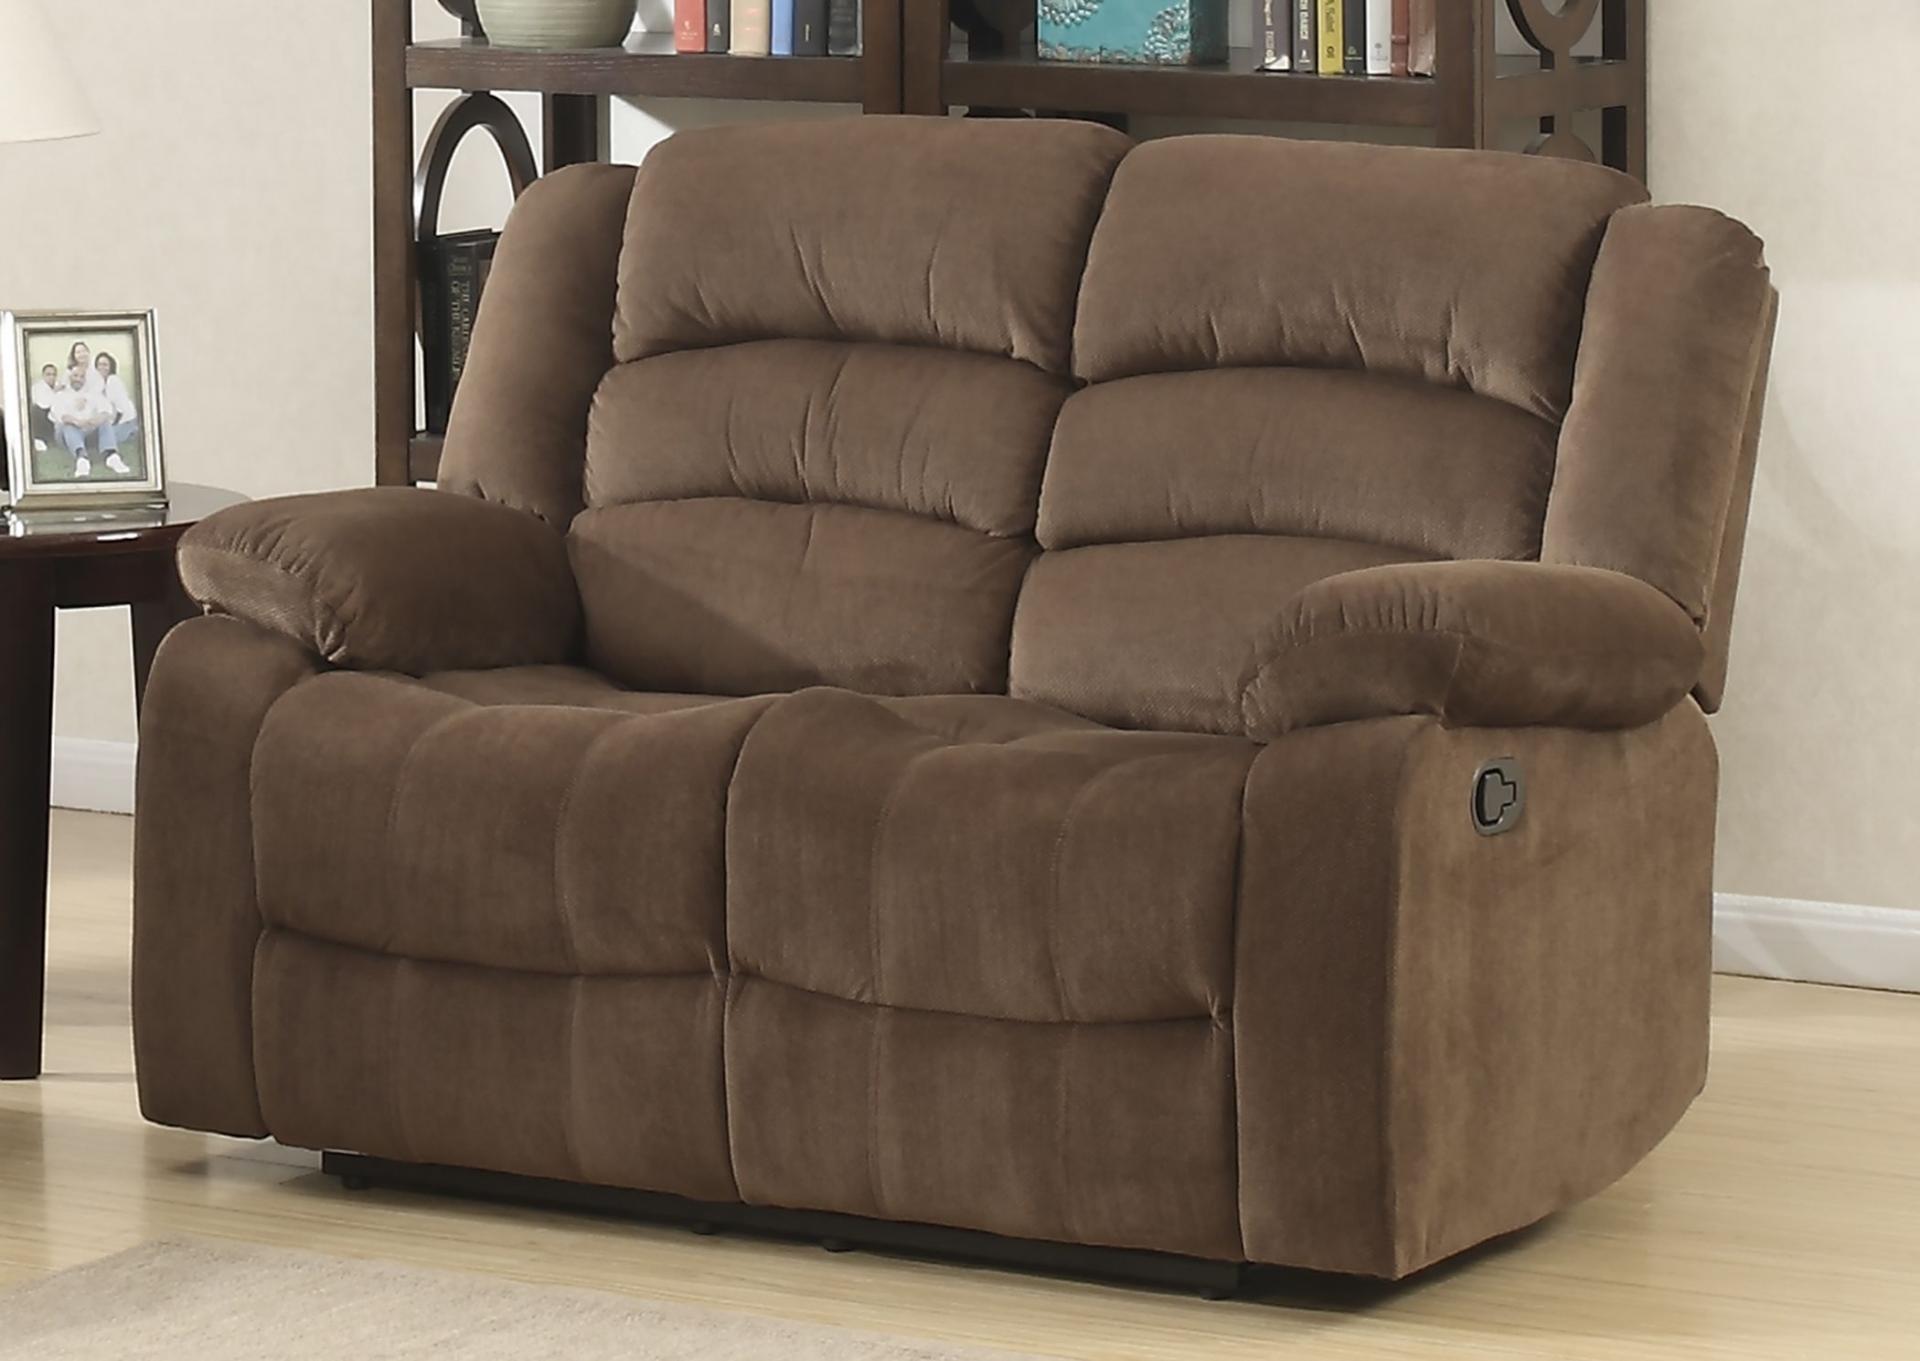 Dual Reclining Brown Fabric Sofa and Dual Reclining Love Seat with Pull Cables